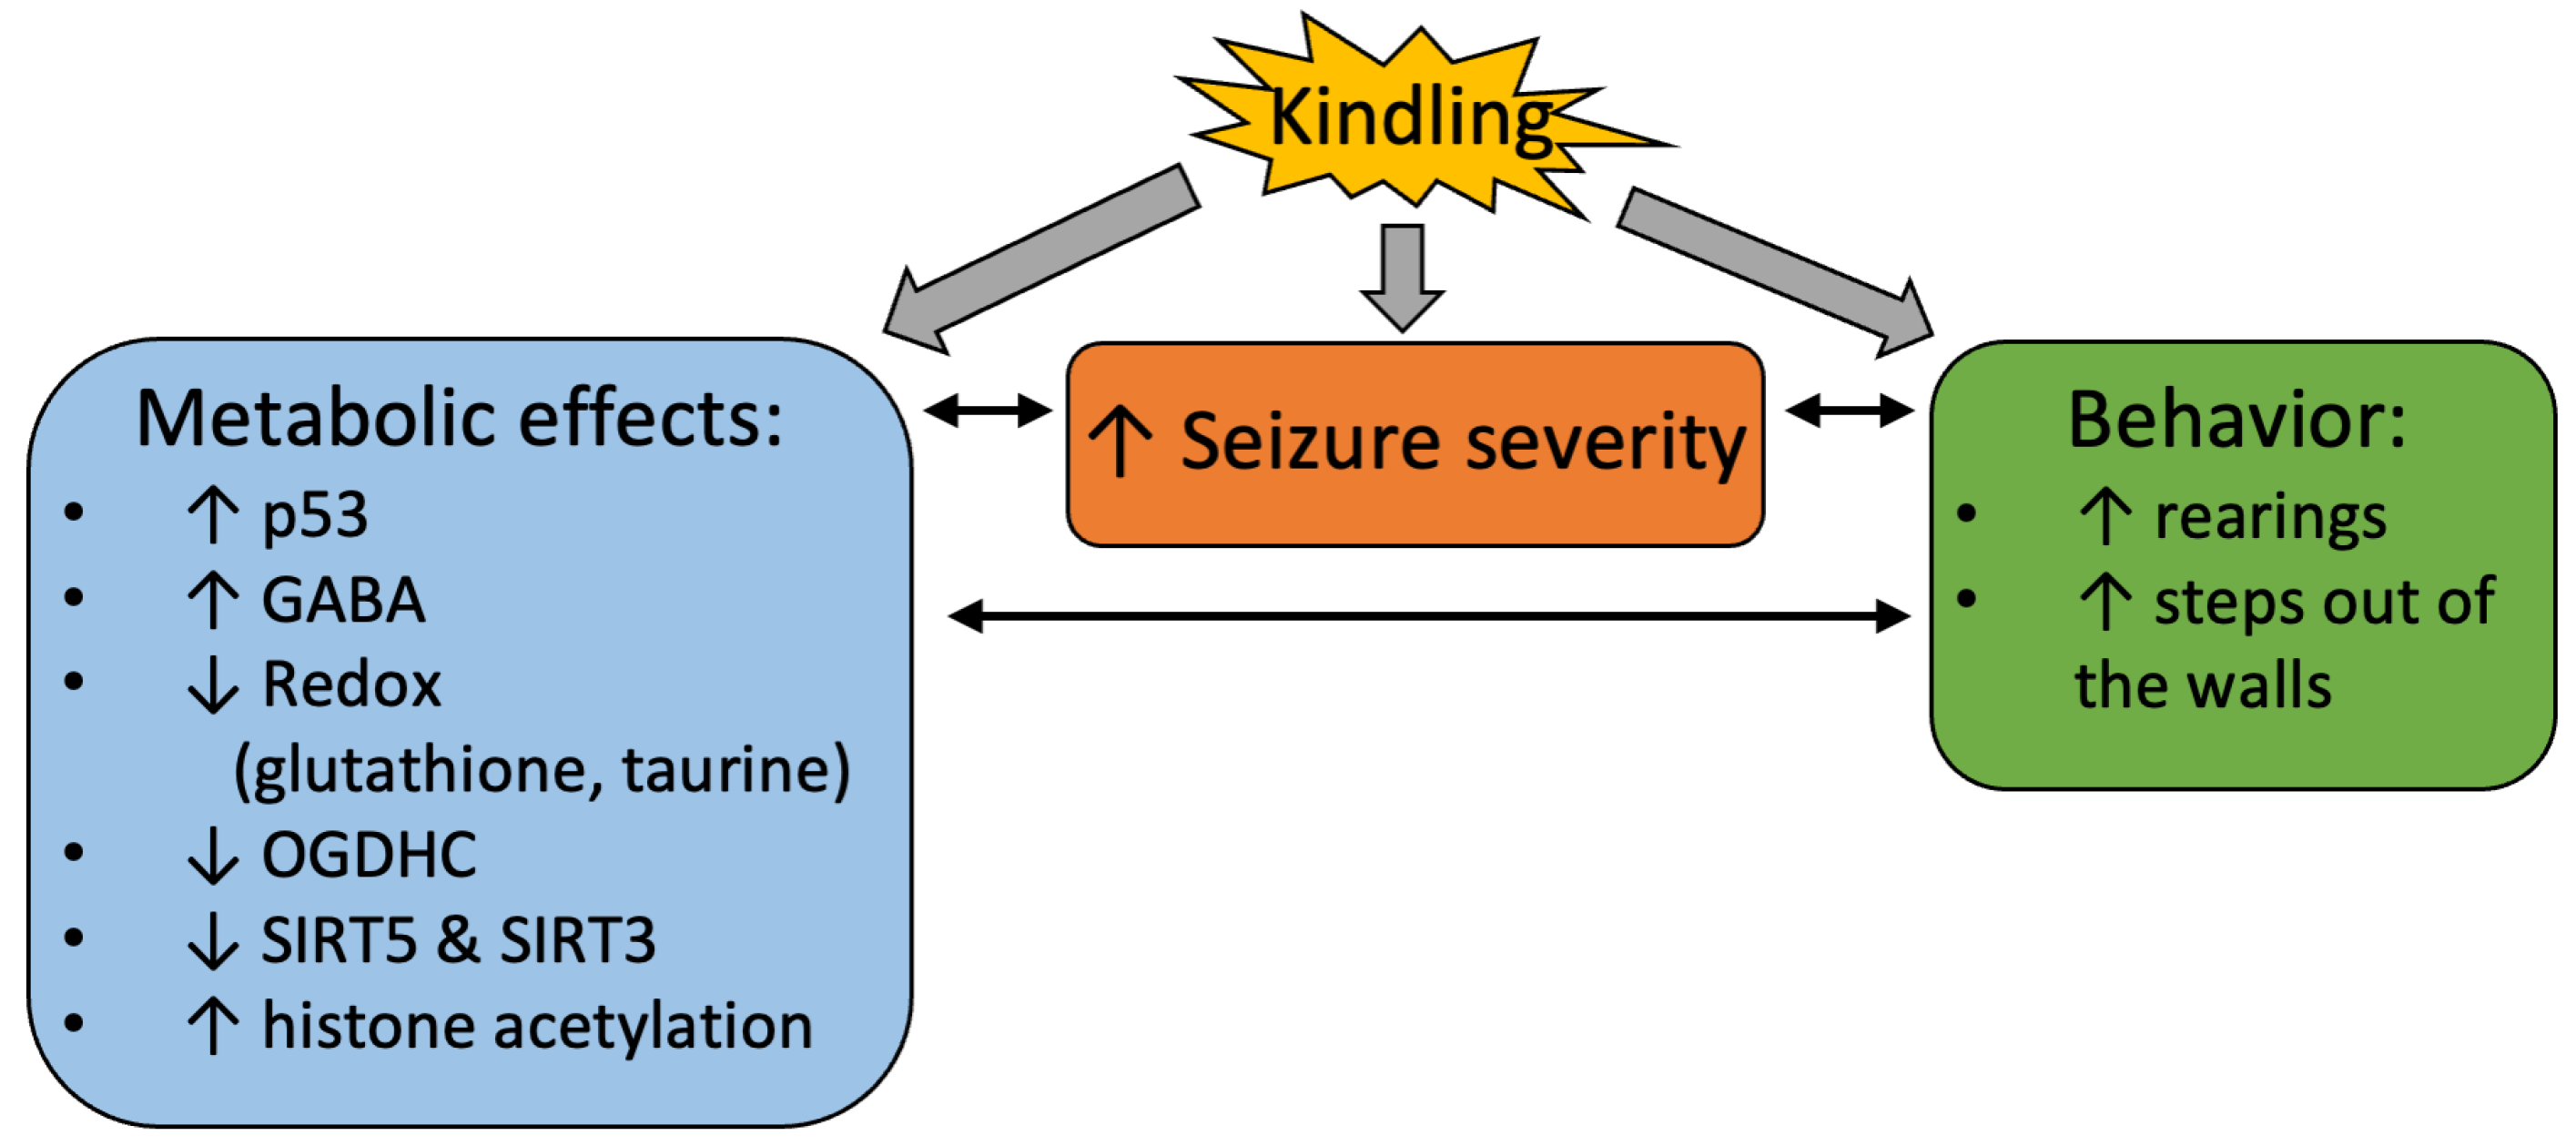 IJMS | Free Full-Text | Pentylenetetrazole-Induced Seizures Are Increased  after Kindling, Exhibiting Vitamin-Responsive Correlations to the  Post-Seizures Behavior, Amino Acids Metabolism and Key Metabolic Regulators  in the Rat Brain